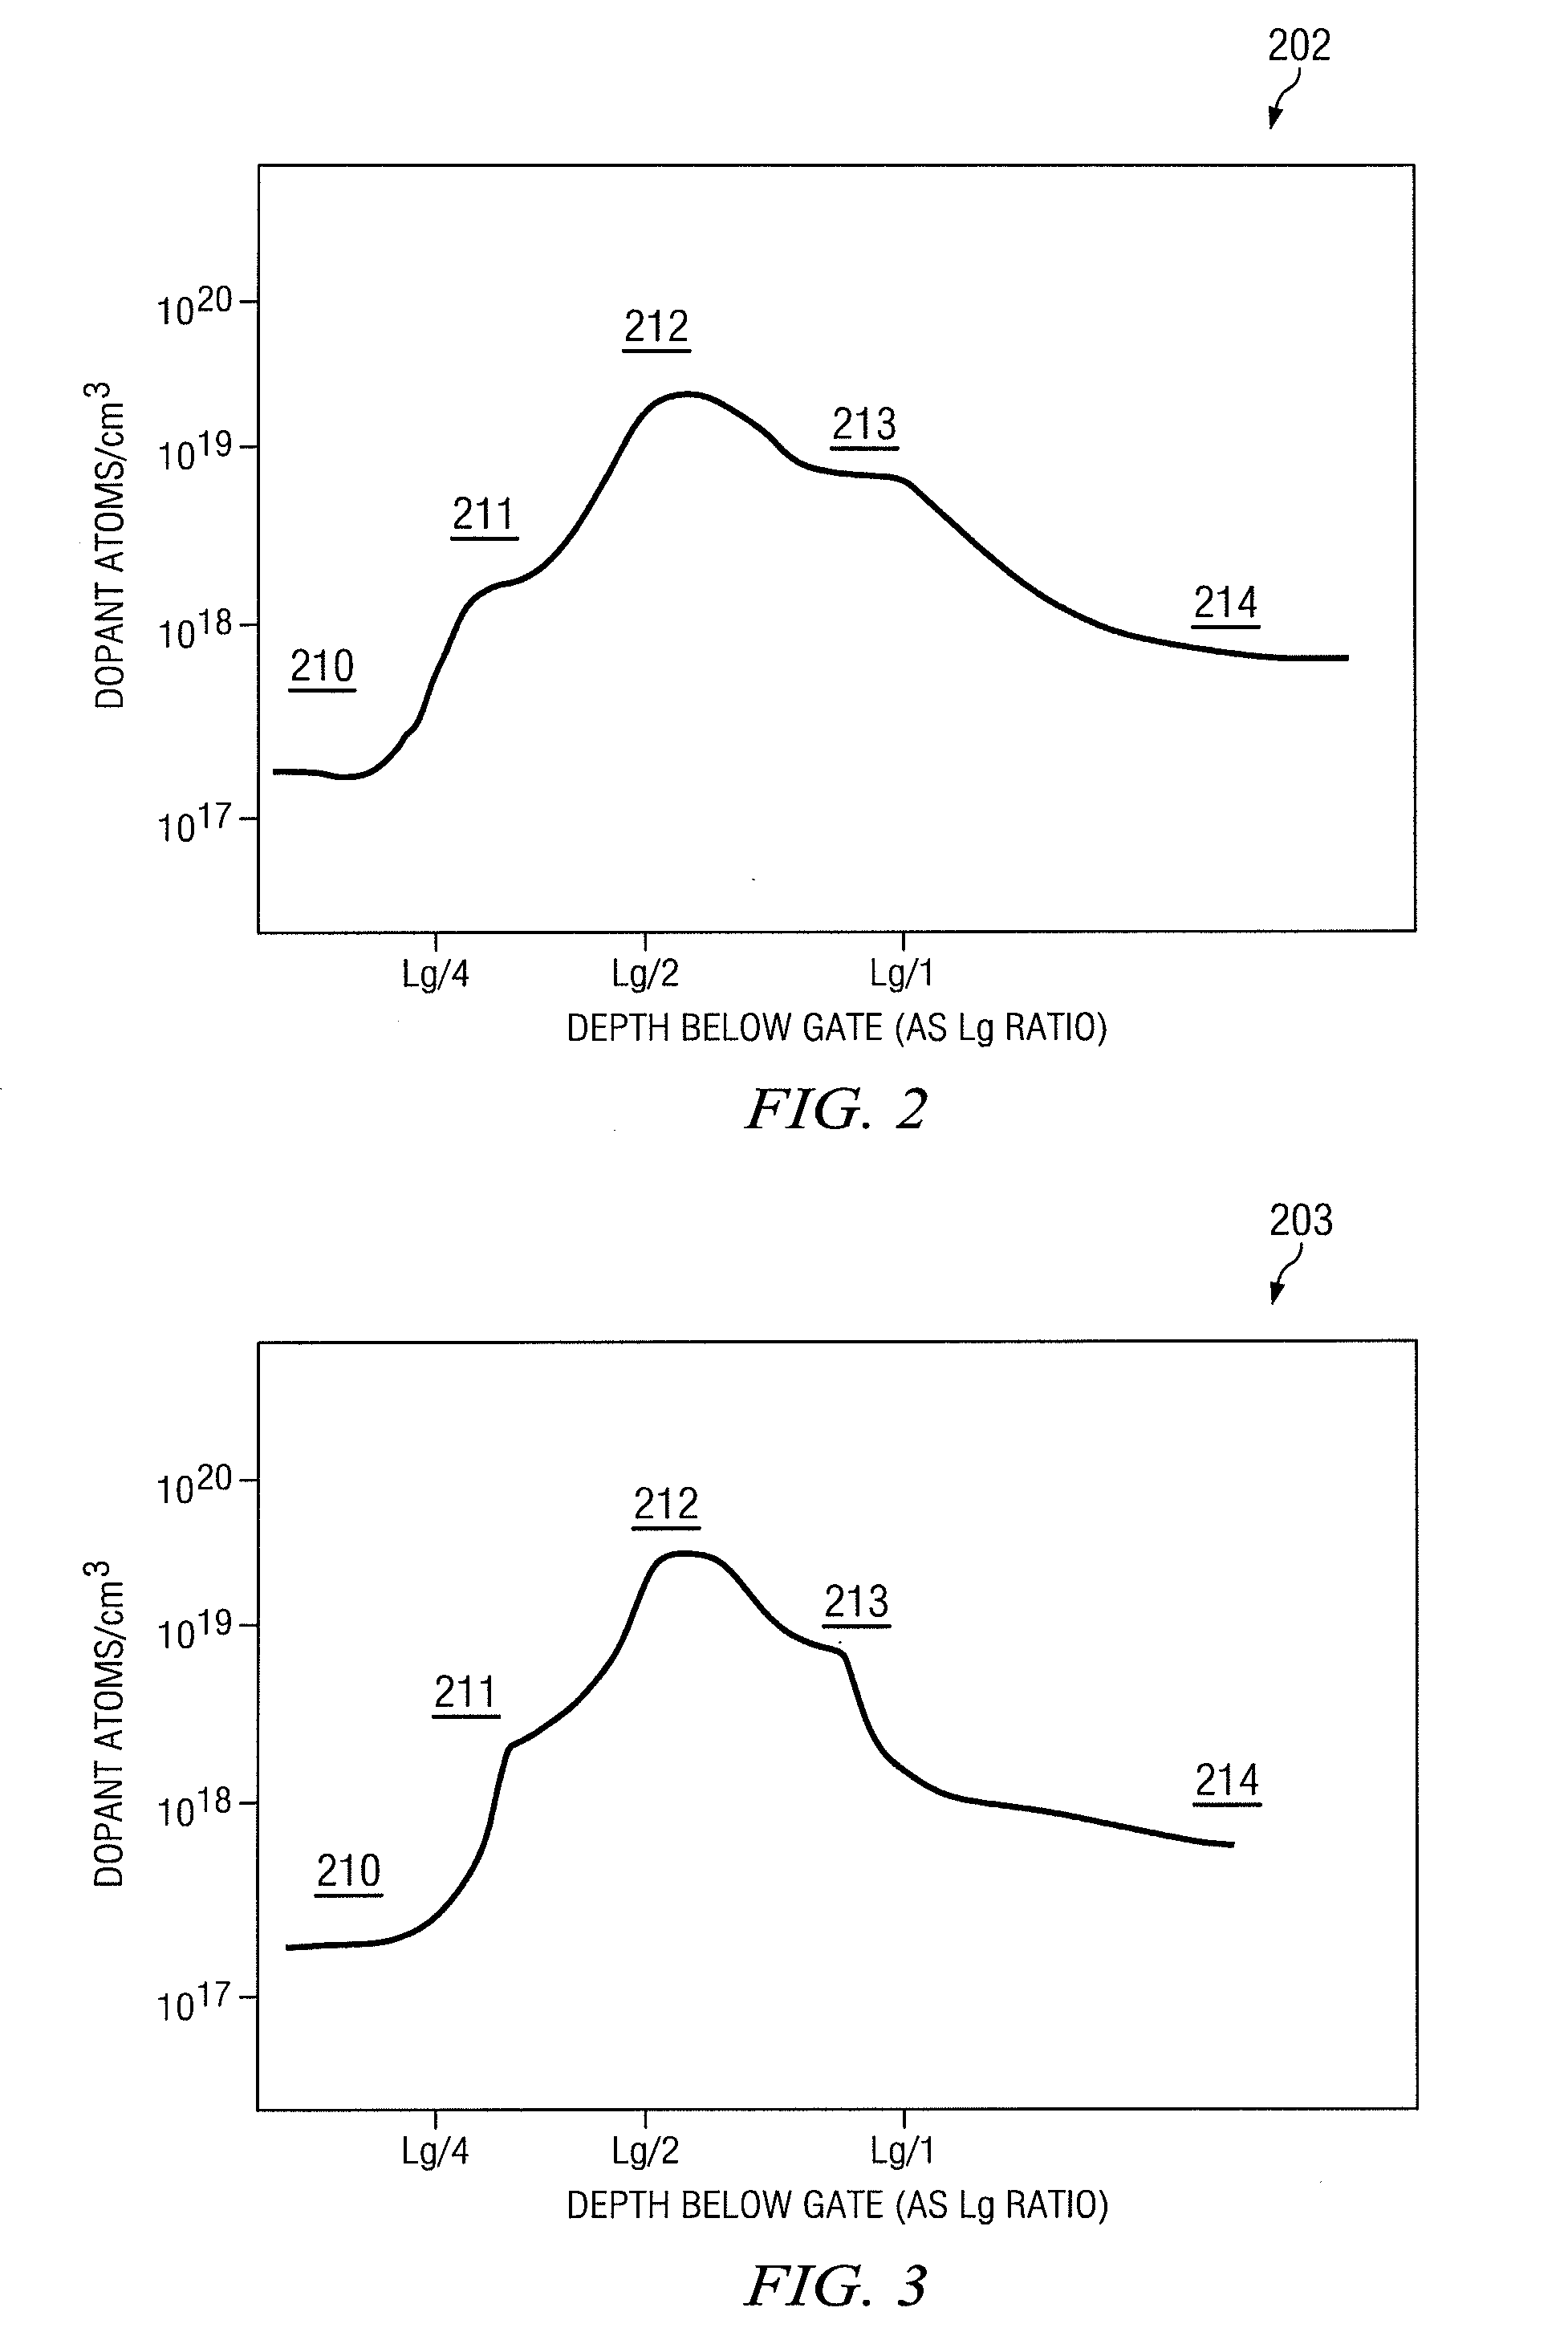 Advanced transistors with punch through suppression